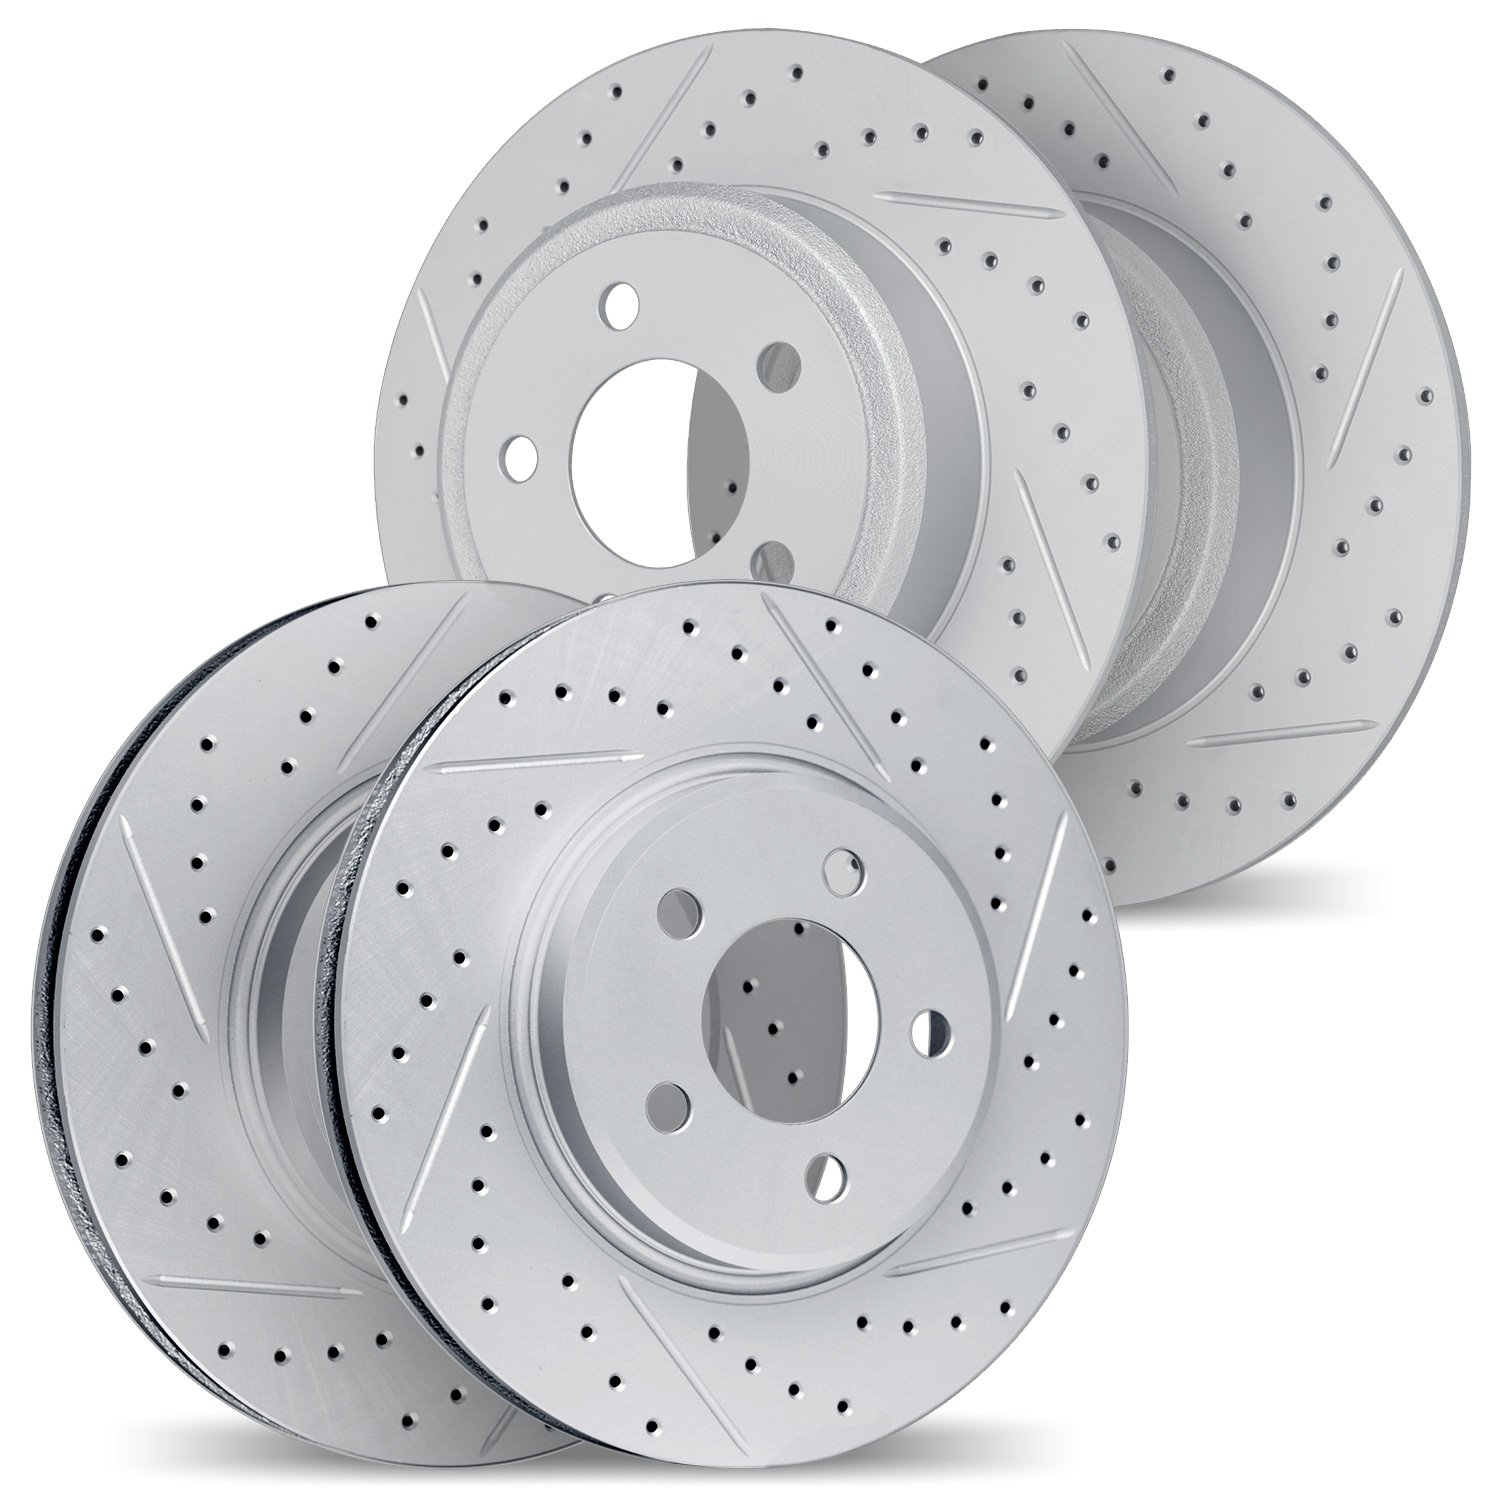 2004-54094 Geoperformance Drilled/Slotted Brake Rotors, 1997-2004 Ford/Lincoln/Mercury/Mazda, Position: Front and Rear